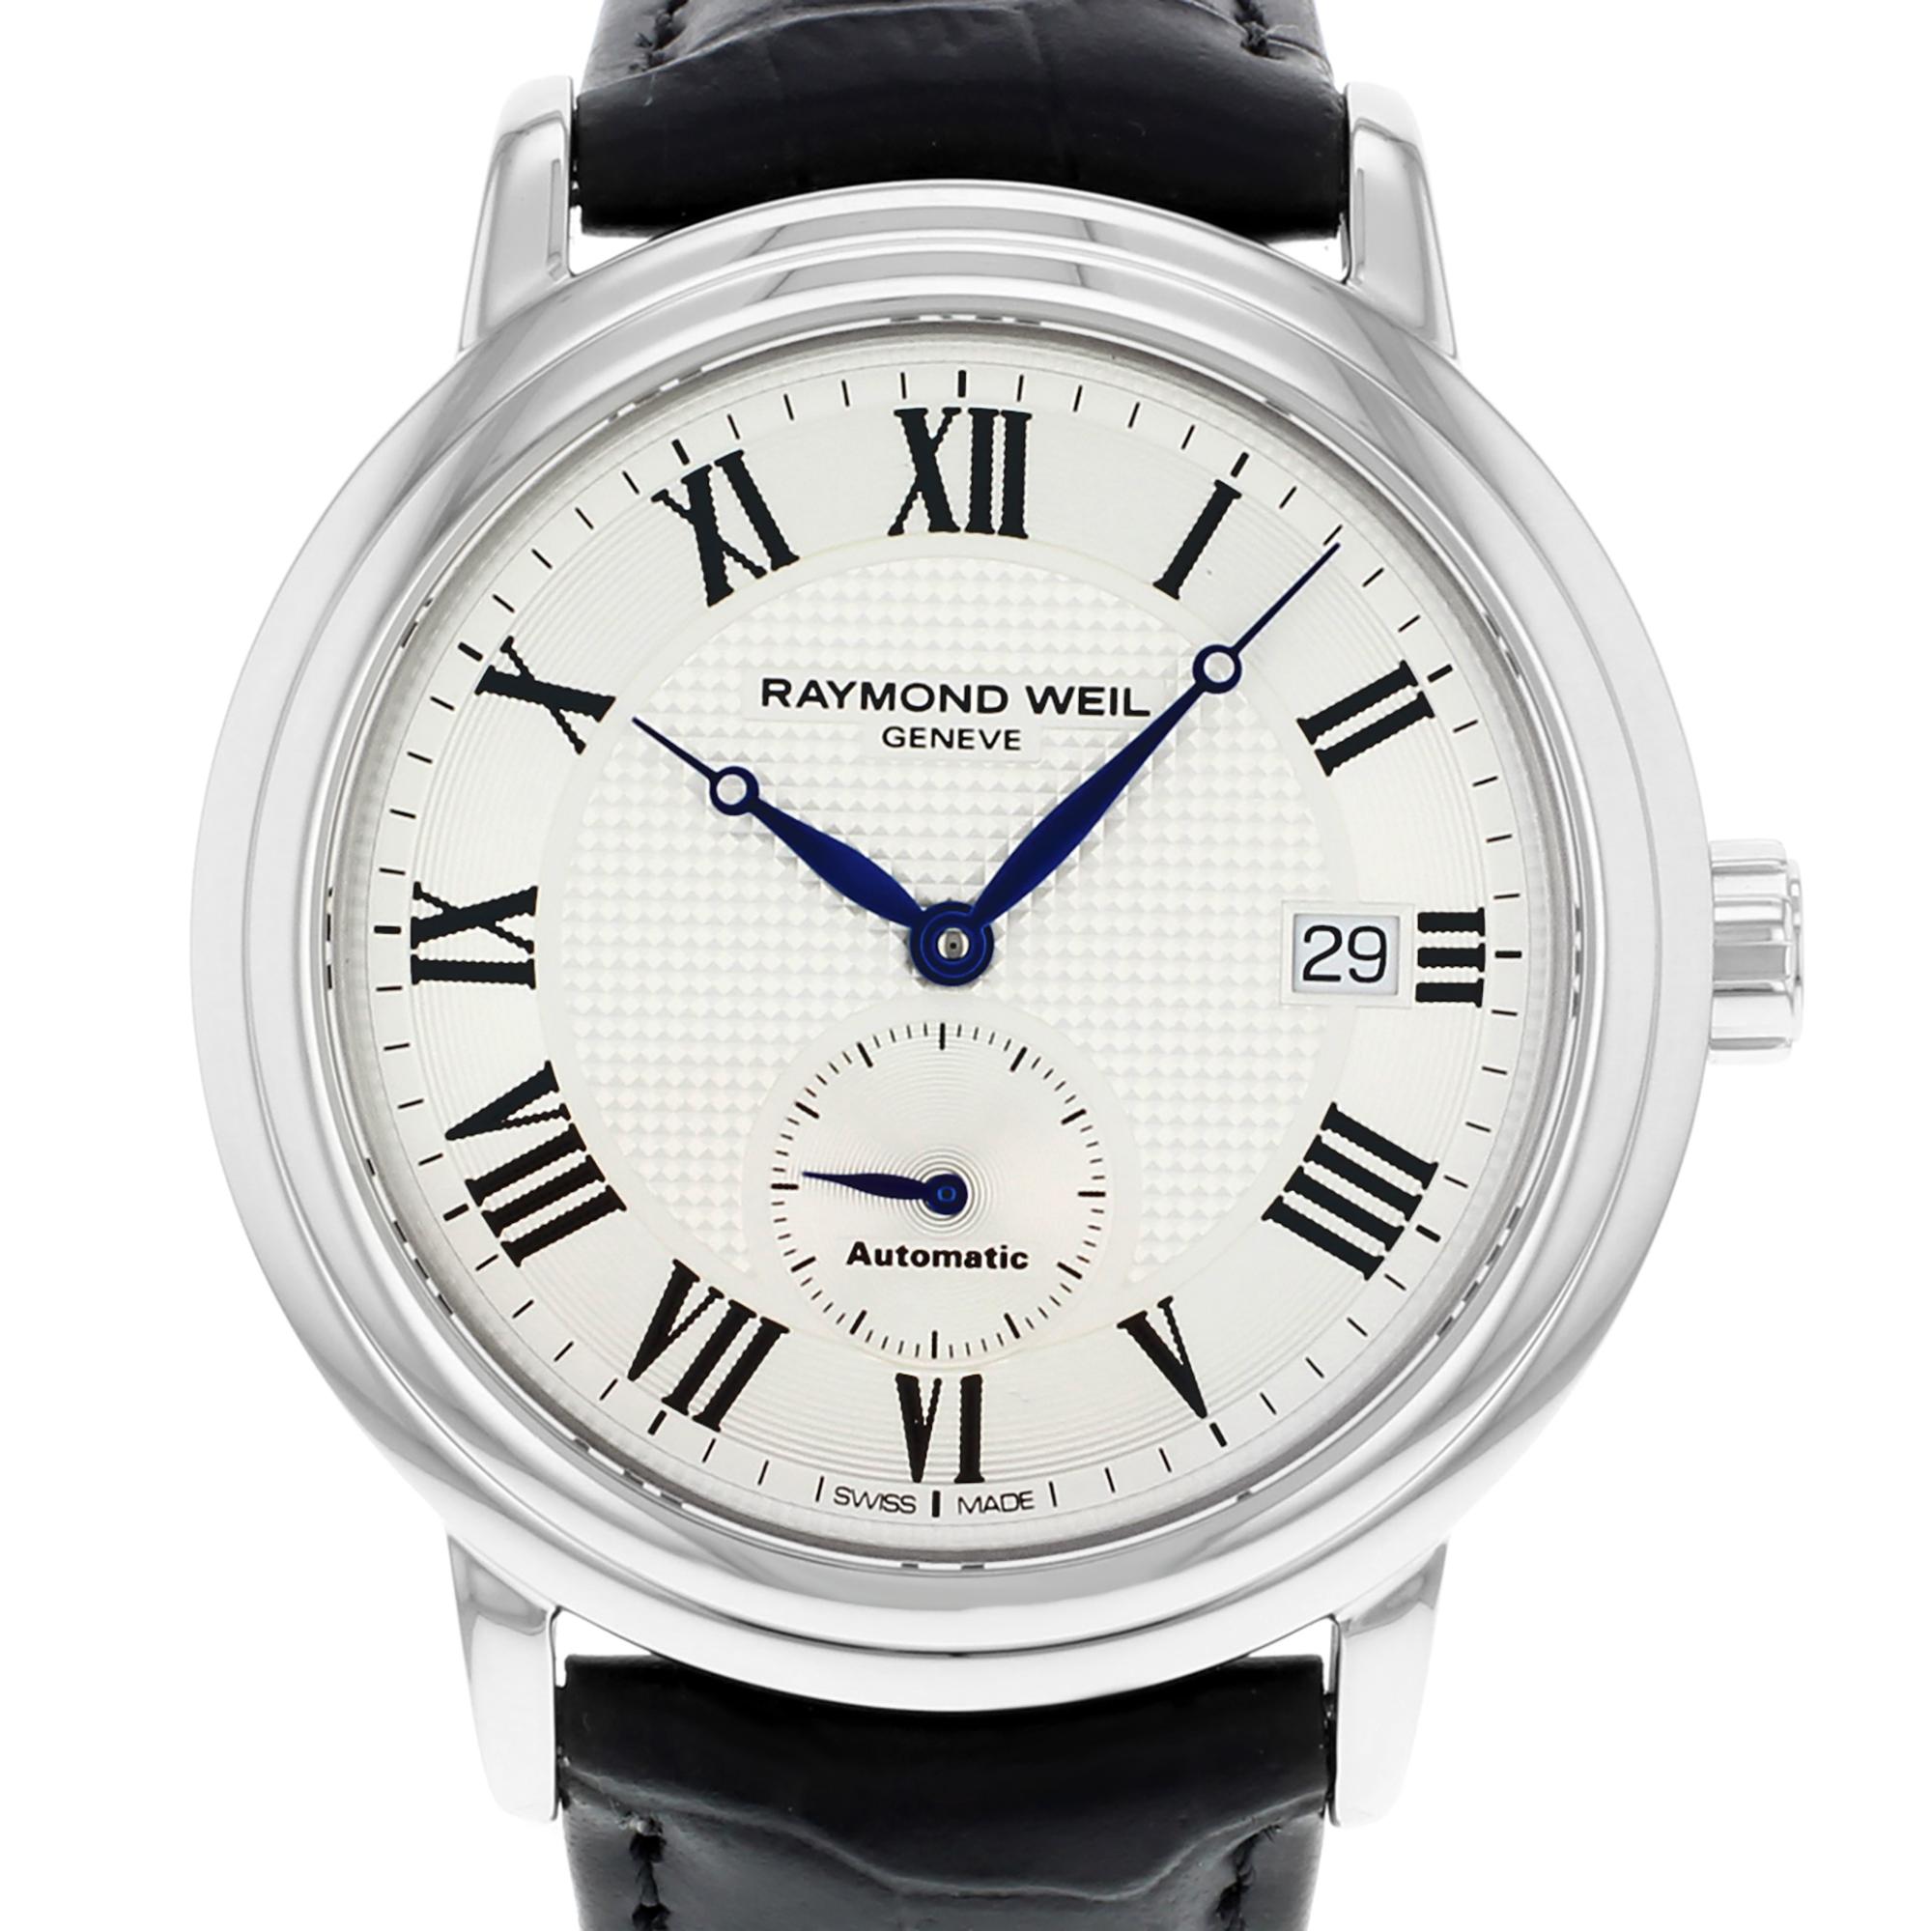 This display model Raymond Weil Maestro  2838-STC-00659 is a beautiful men's timepiece that is powered by mechanical (automatic) movement which is cased in a stainless steel case. It has a round shape face, date indicator, small seconds subdial dial